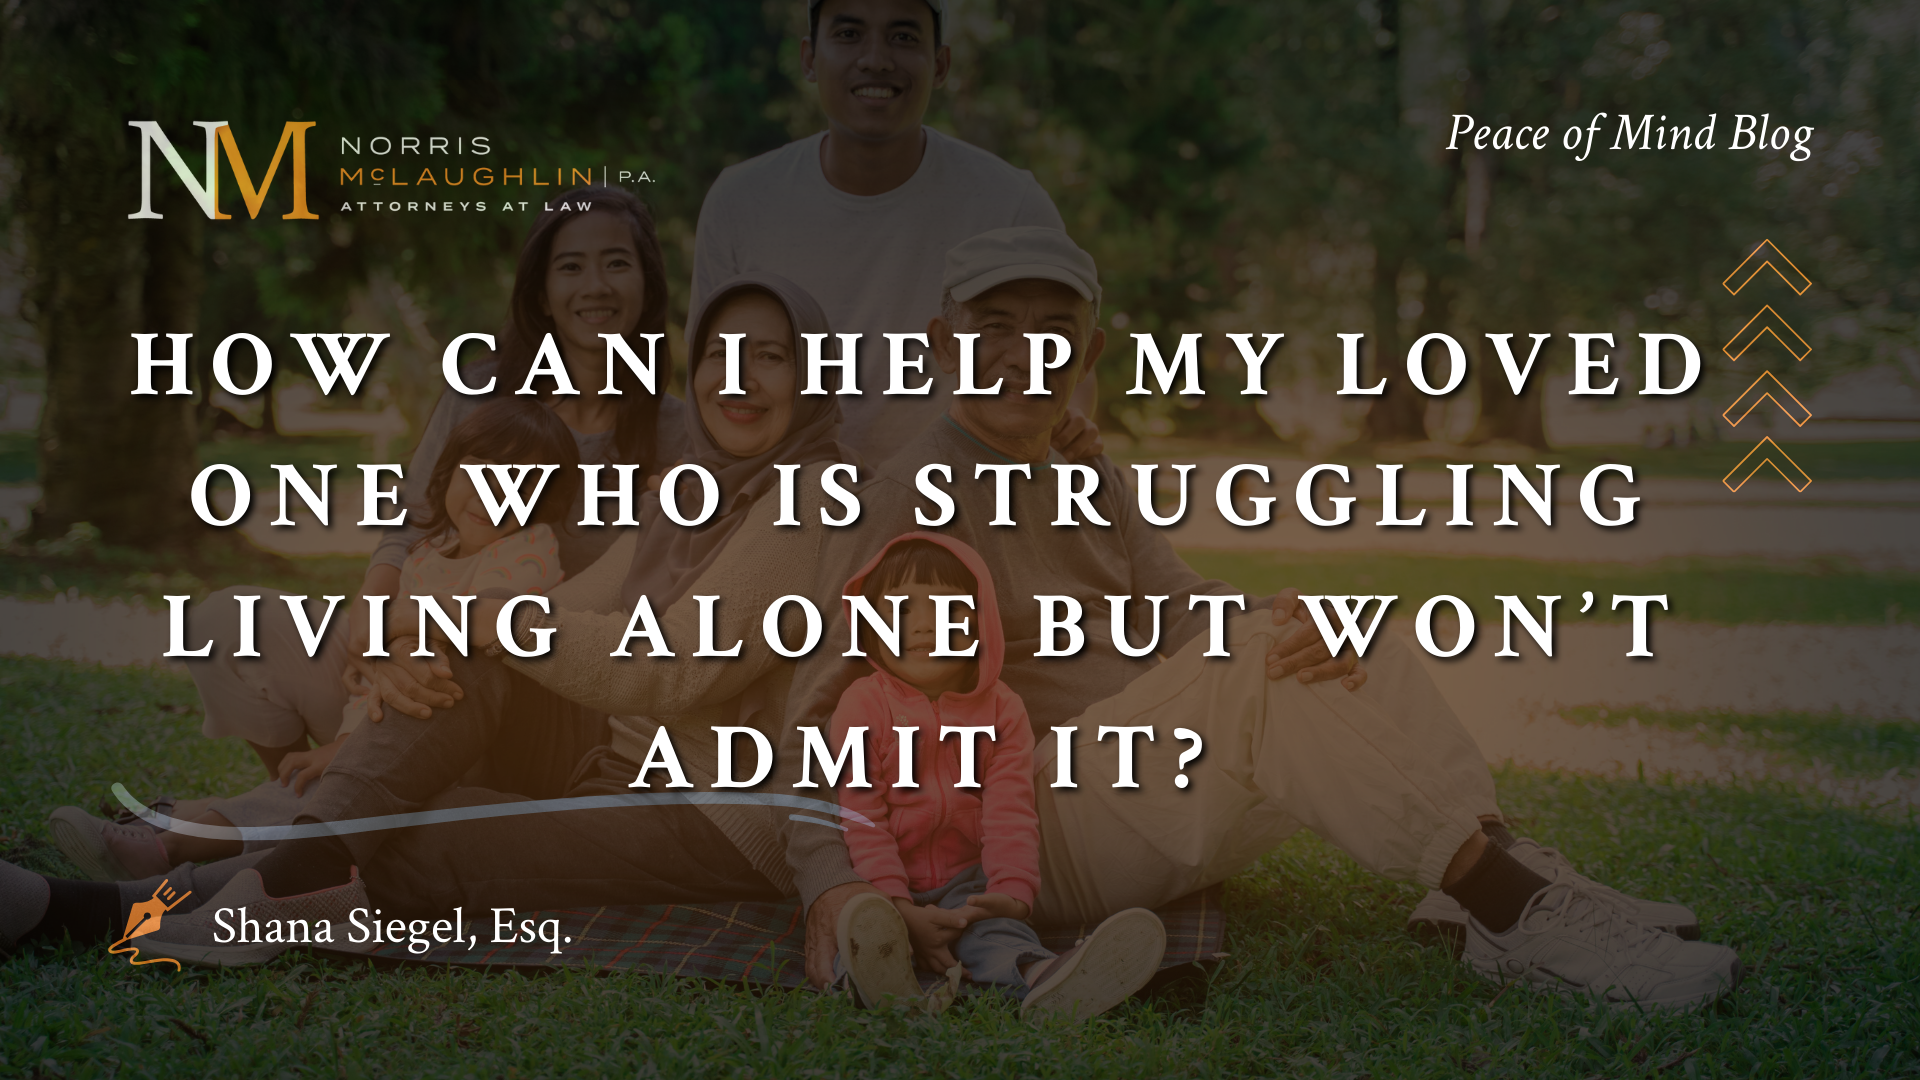 How Can I Help My Loved One Who Is Struggling Living Alone But Won’t Admit It?